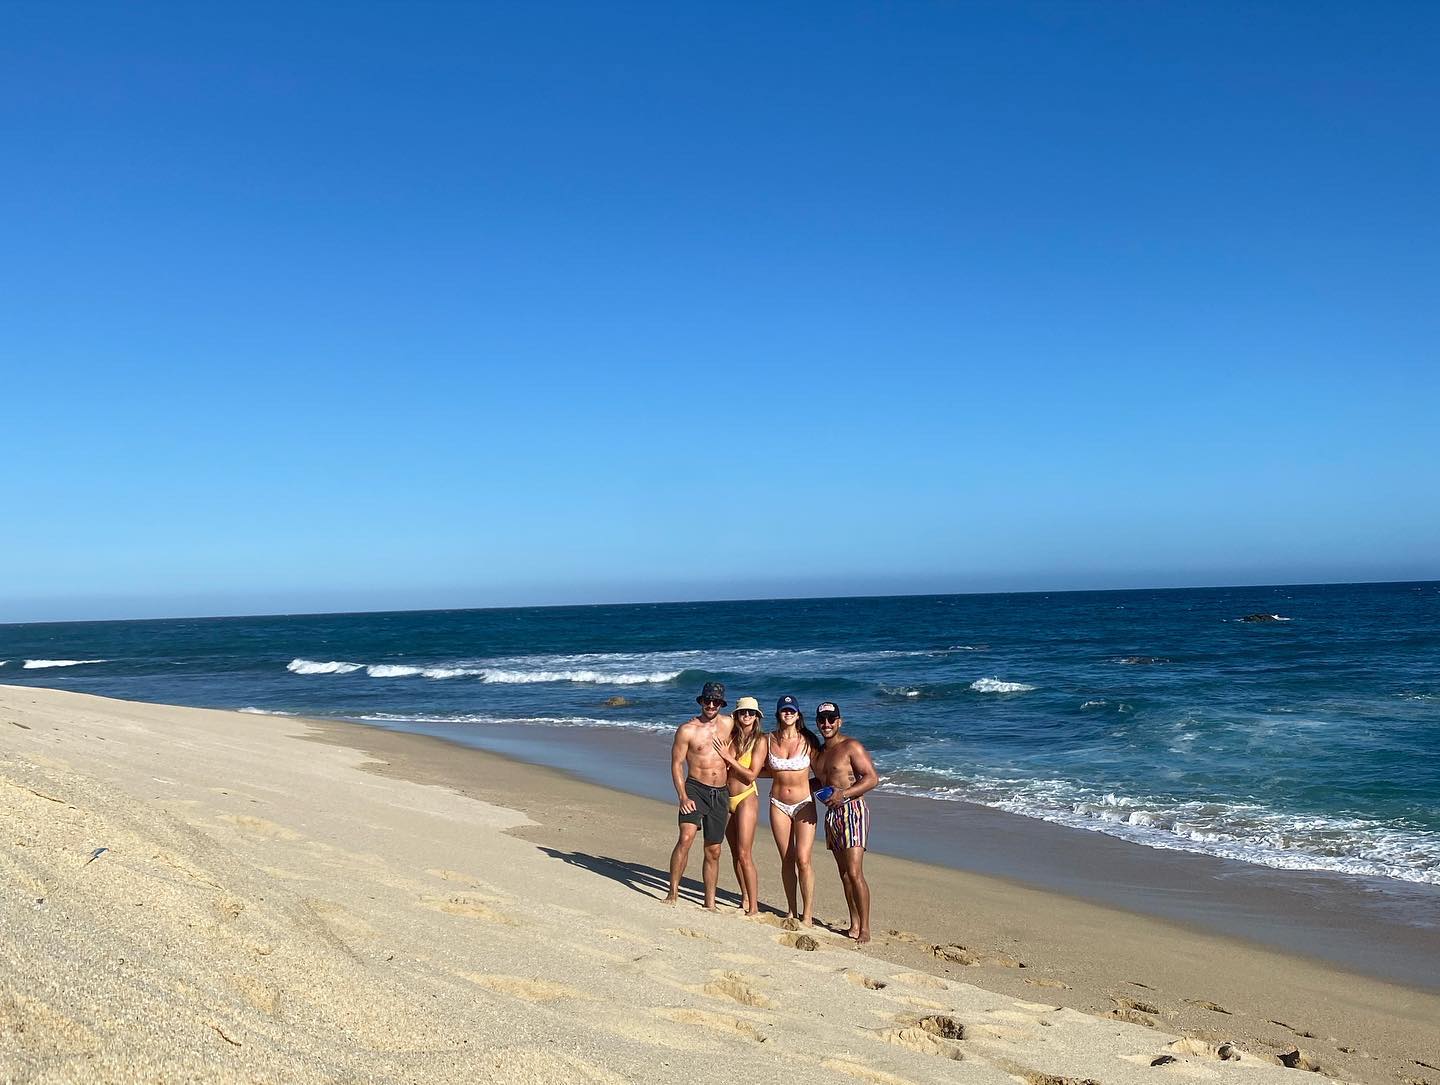 JACLYN’S MEXICO TRAVEL RECAP – Travelling During The Pandemic